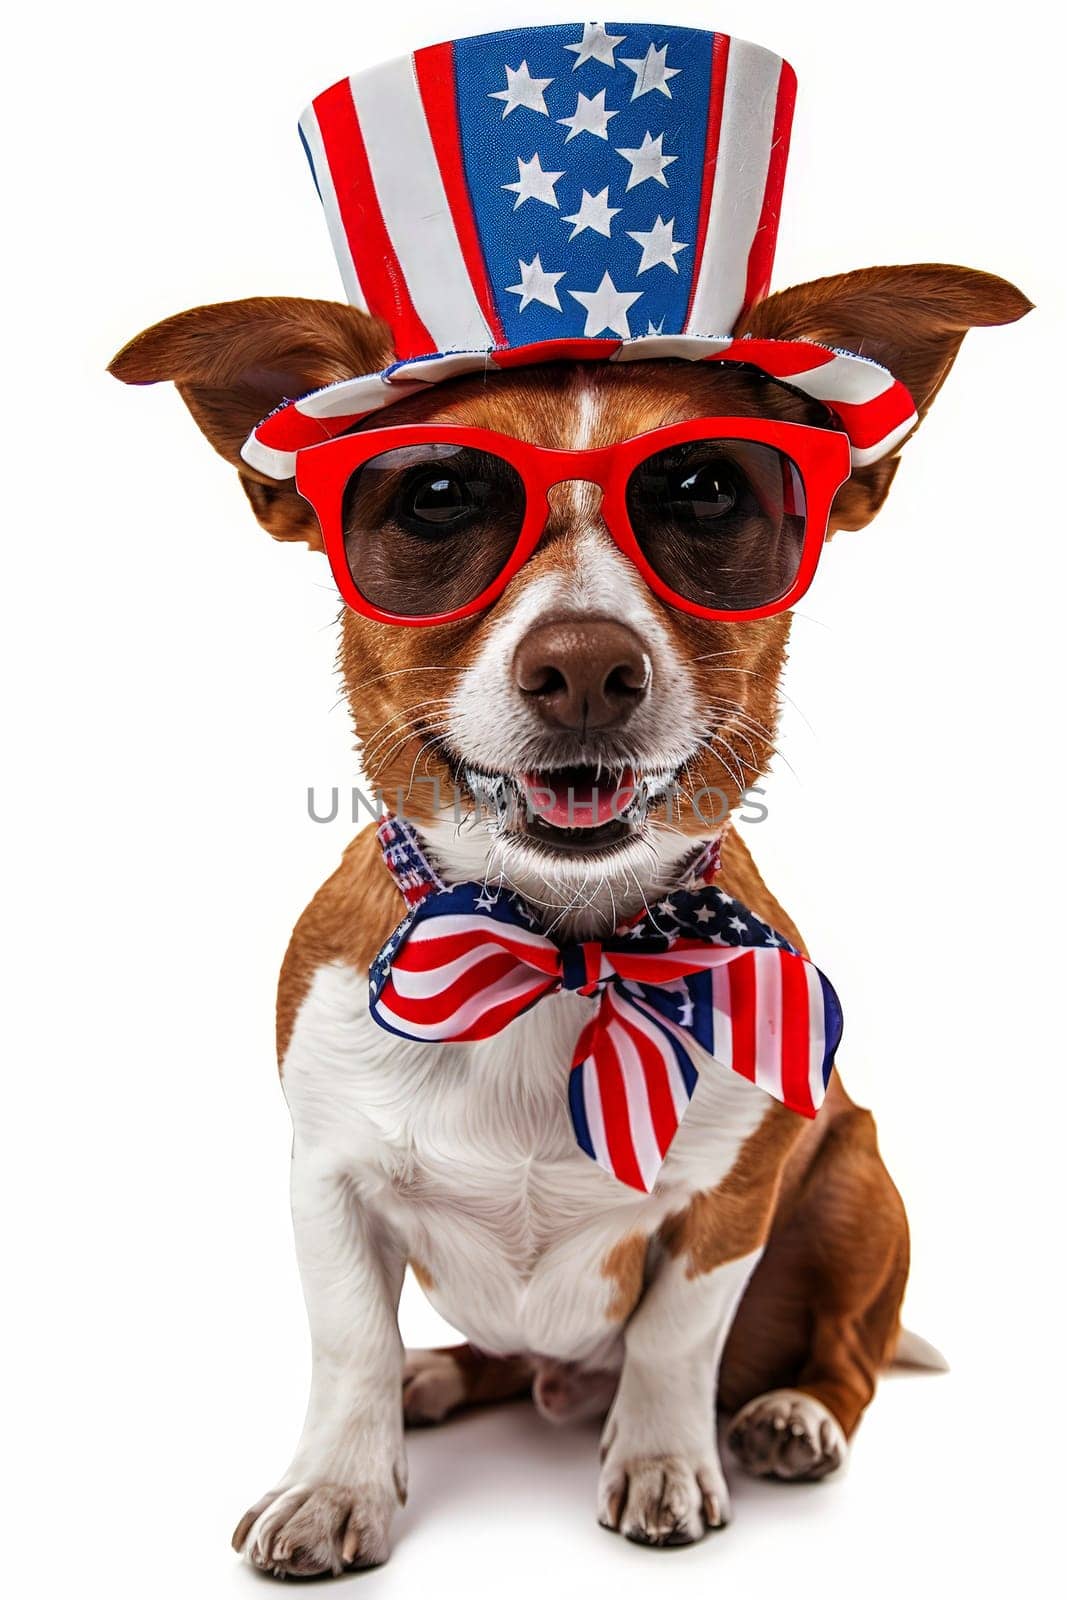 A Russell dog wearing a USA top hat and sunglasses. independence day concept.